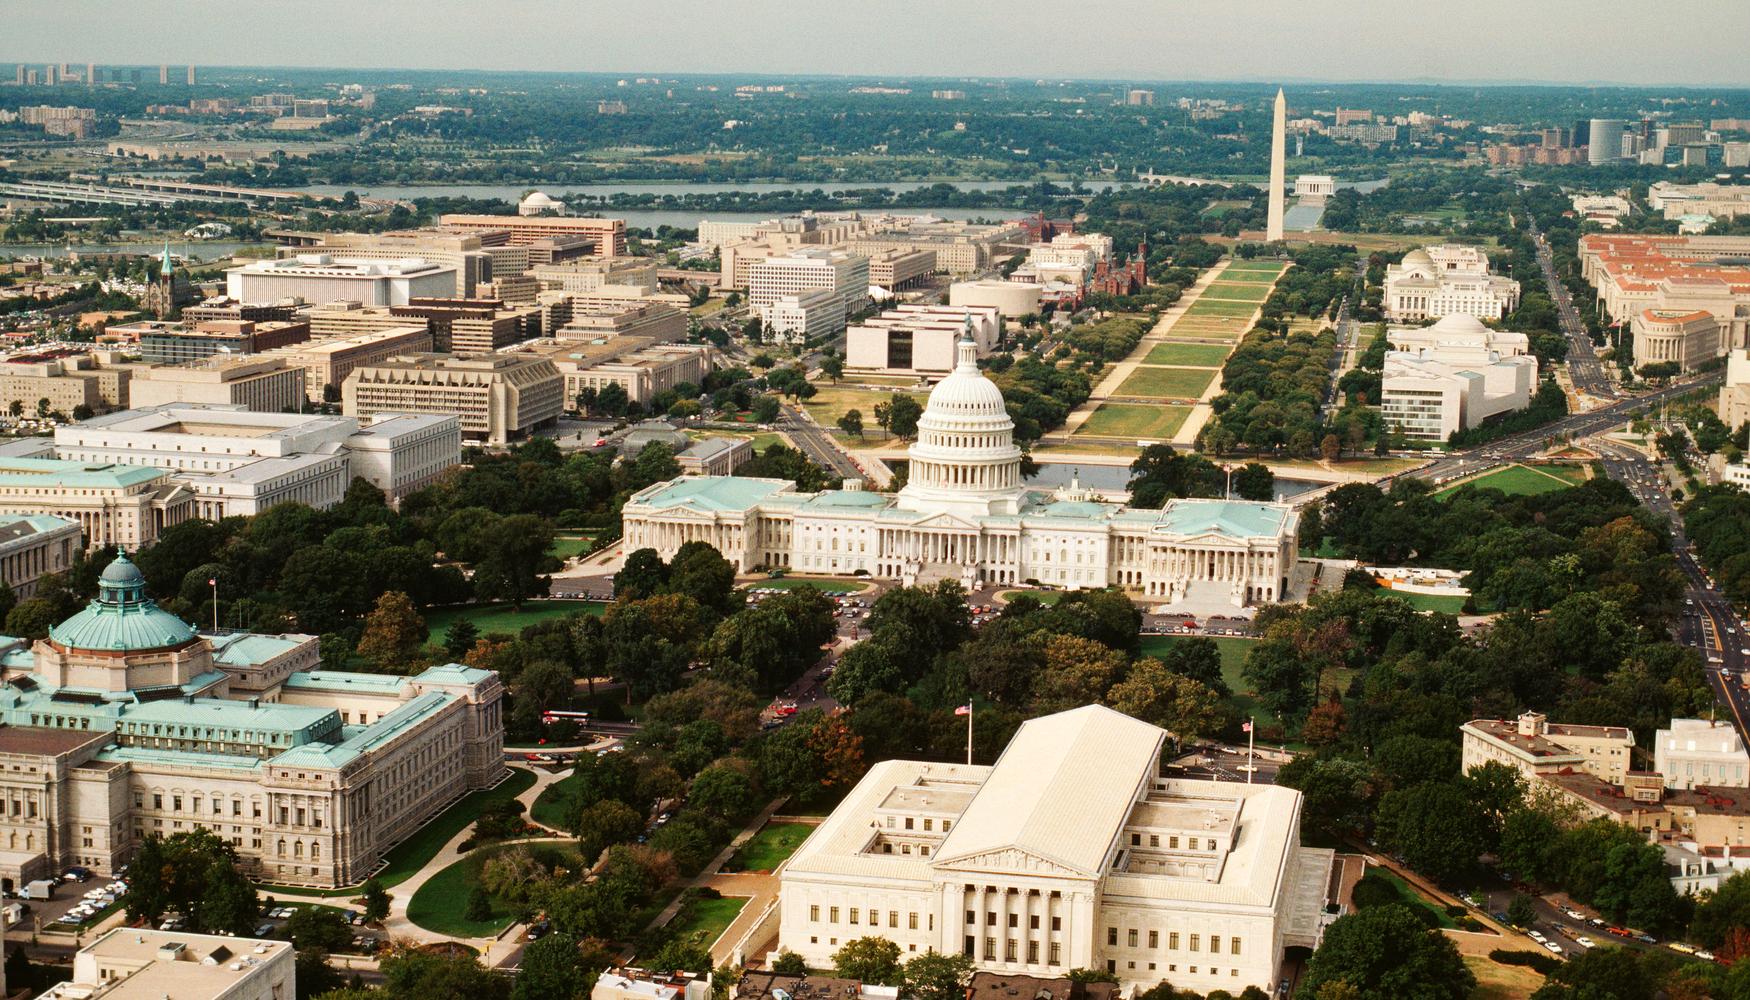 Washington, D.C. Vacation Packages from 171 Search Flight+Hotel on KAYAK